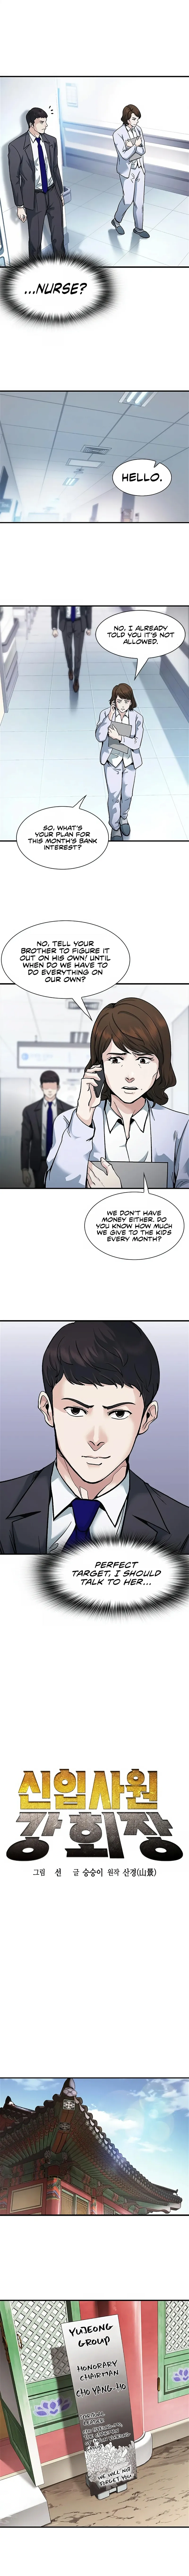 Chairman Kang: The Newcomer Chapter 5 page 4